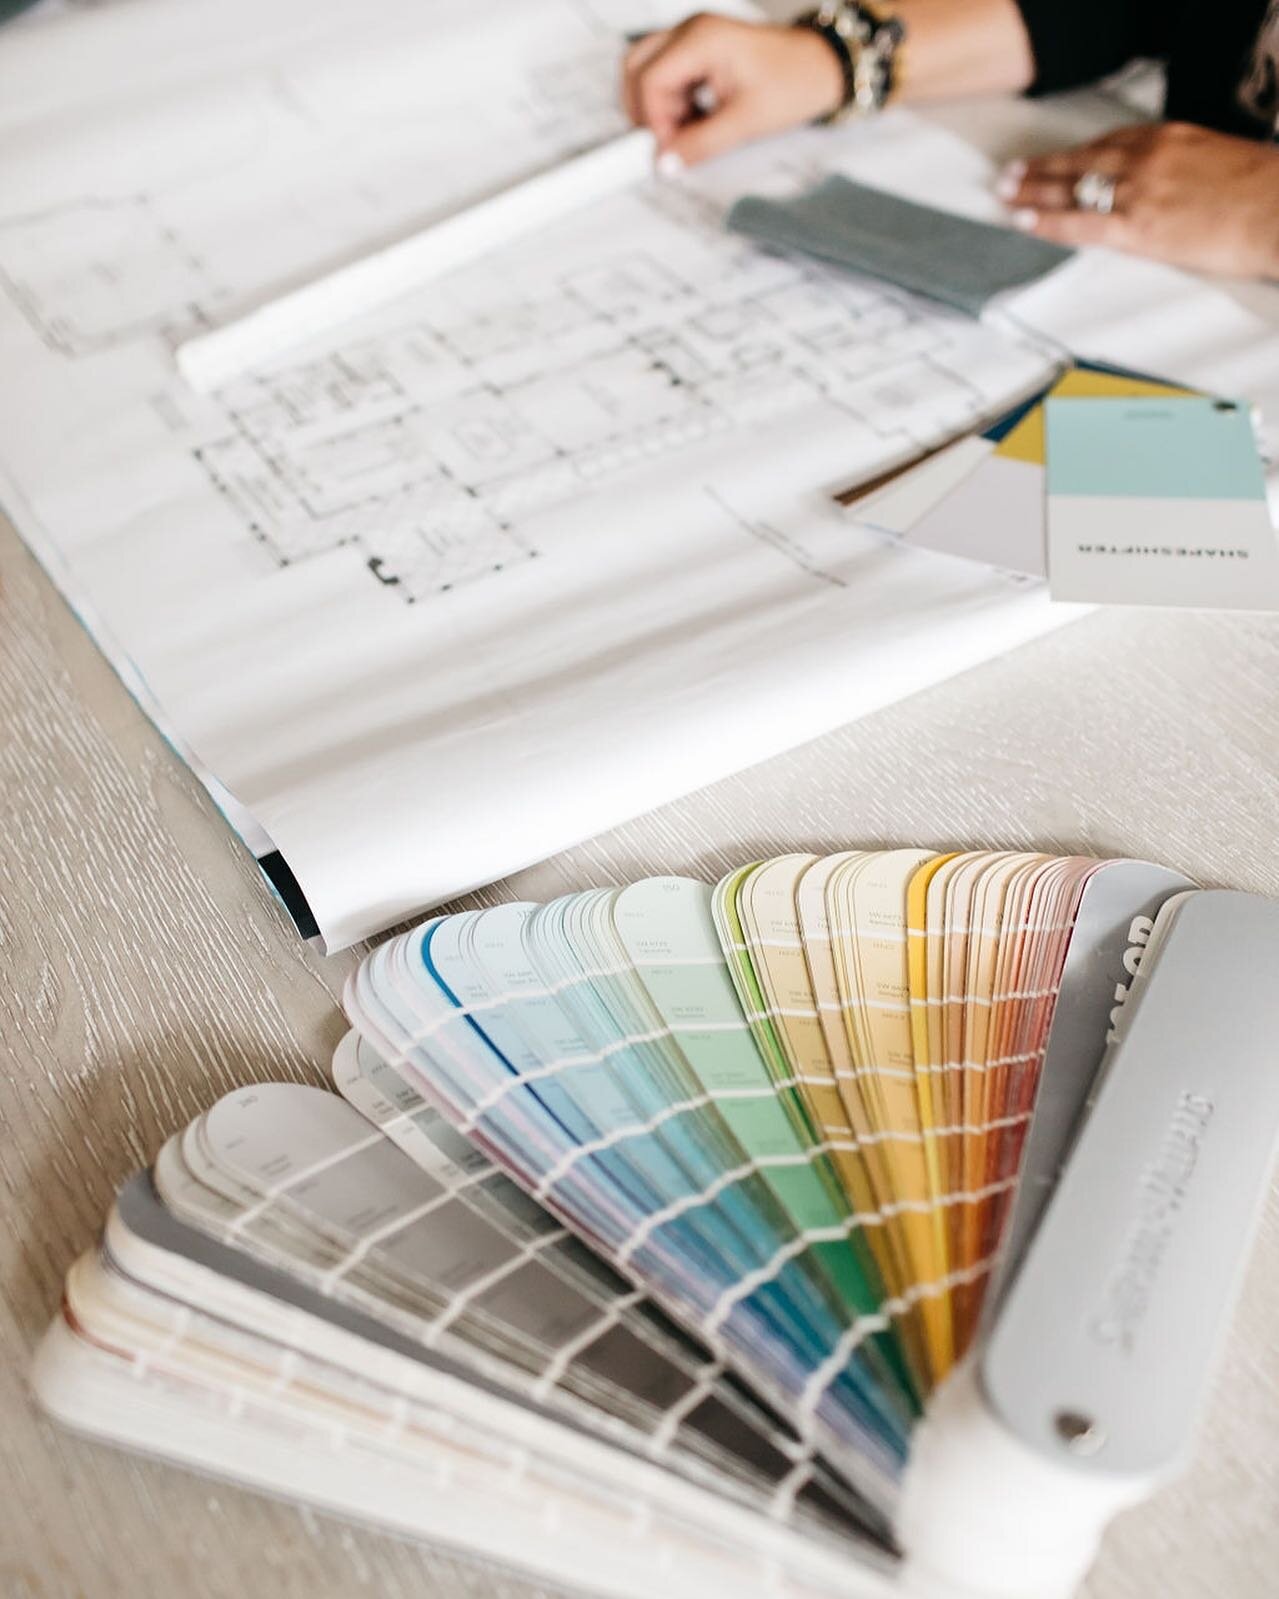 With so many choices to make for your home's design, we'll help you make the right ones that make sense for you and your home. Visit the #linkinbio to connect with our team! ⁠⁠
⁠